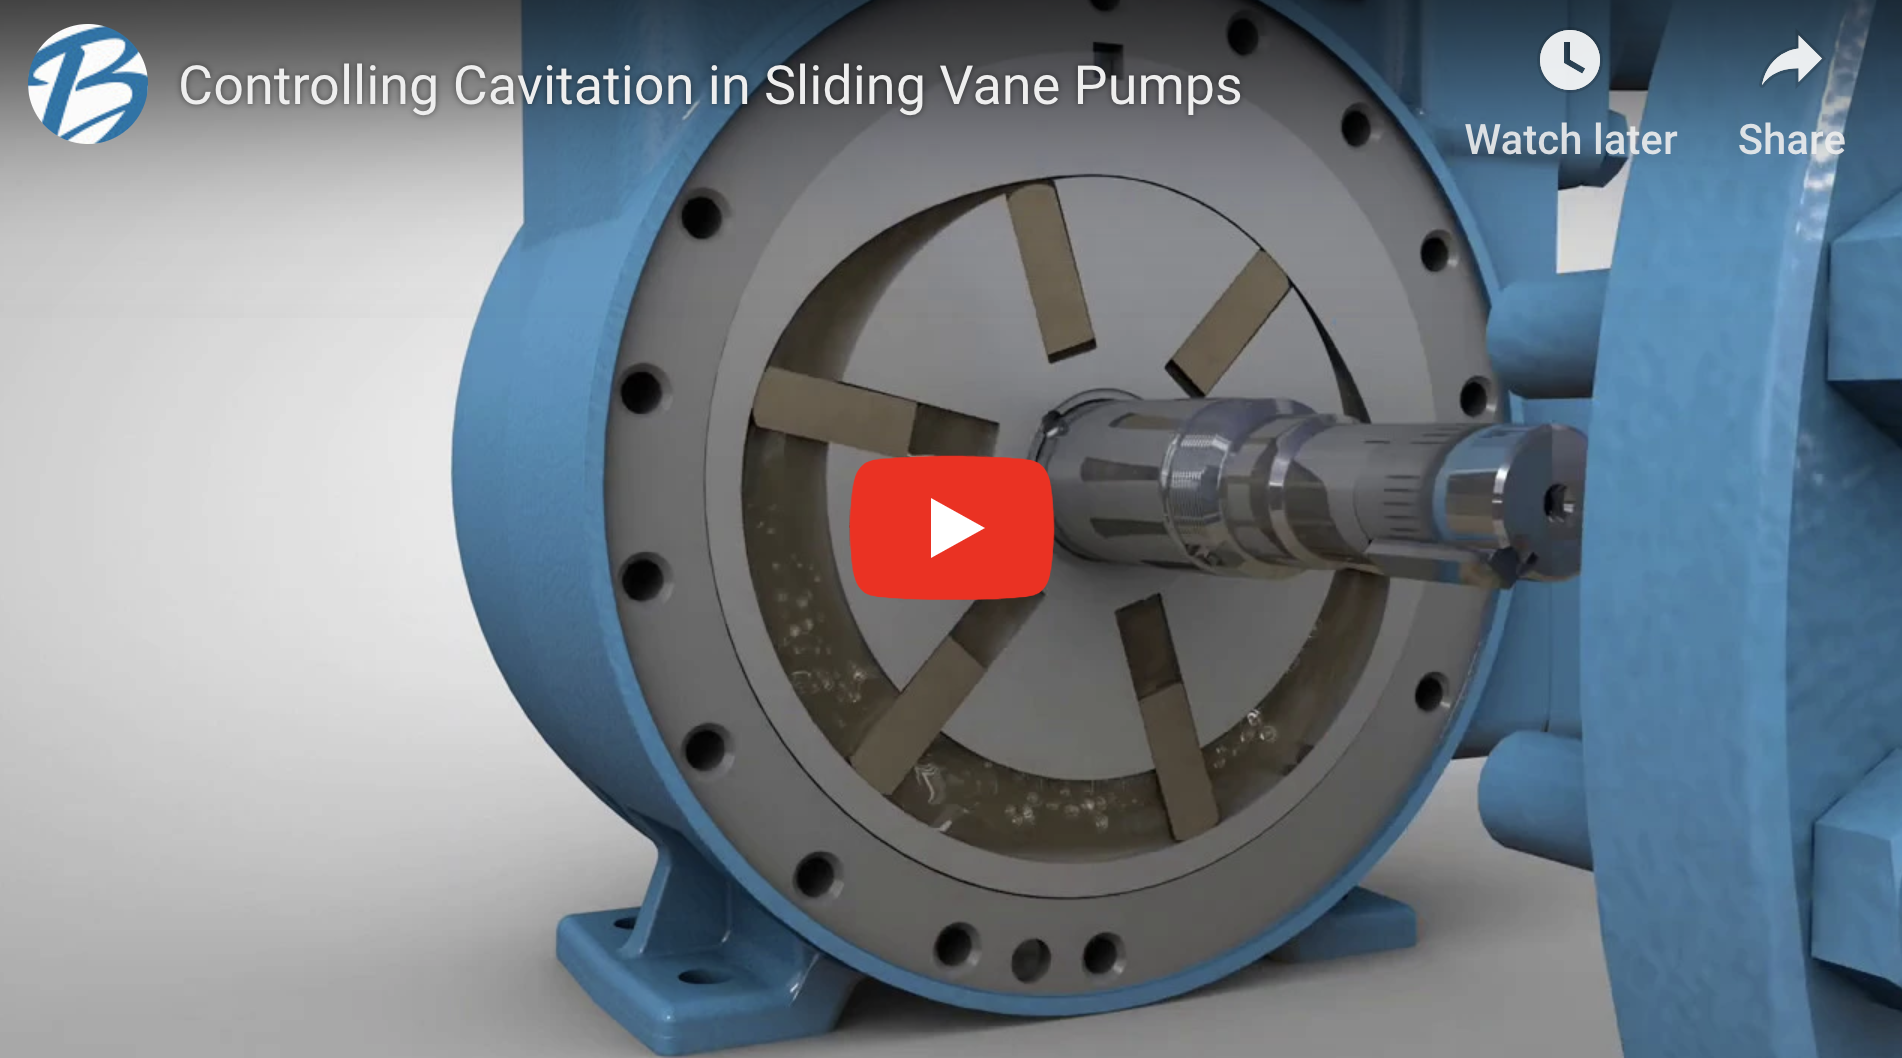 The video shows why cavitation occurs, the potential harmful effects it has on pumping components and possible solutions.